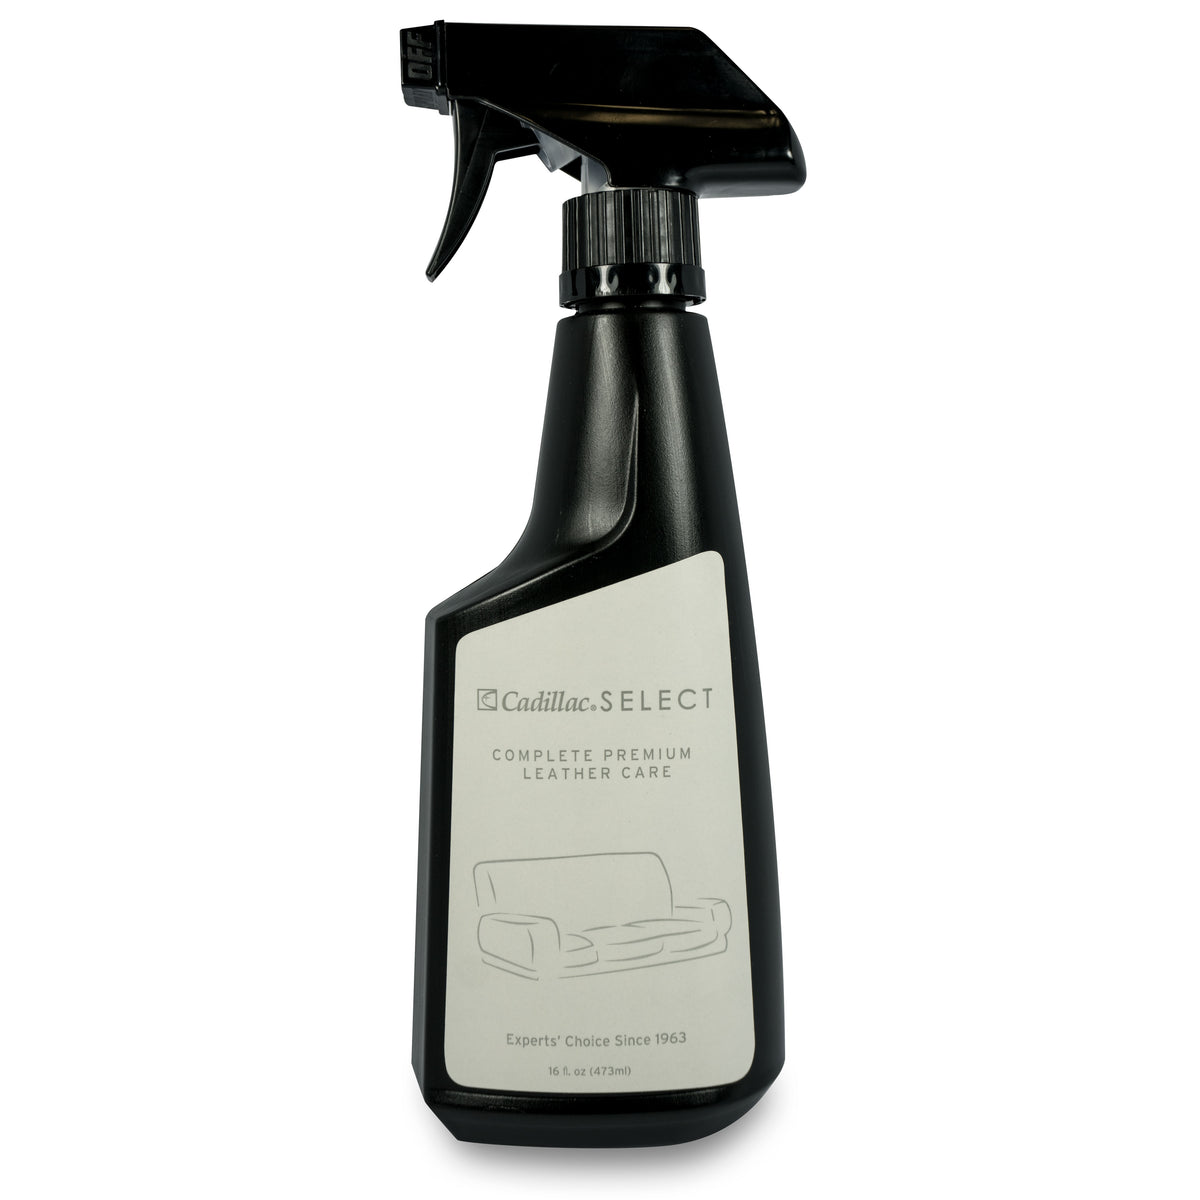 Cadillac Select Premium Leather Cleaner 4 oz - Great for Shoes, Handbags,  Jackets, Gloves, Furniture & More